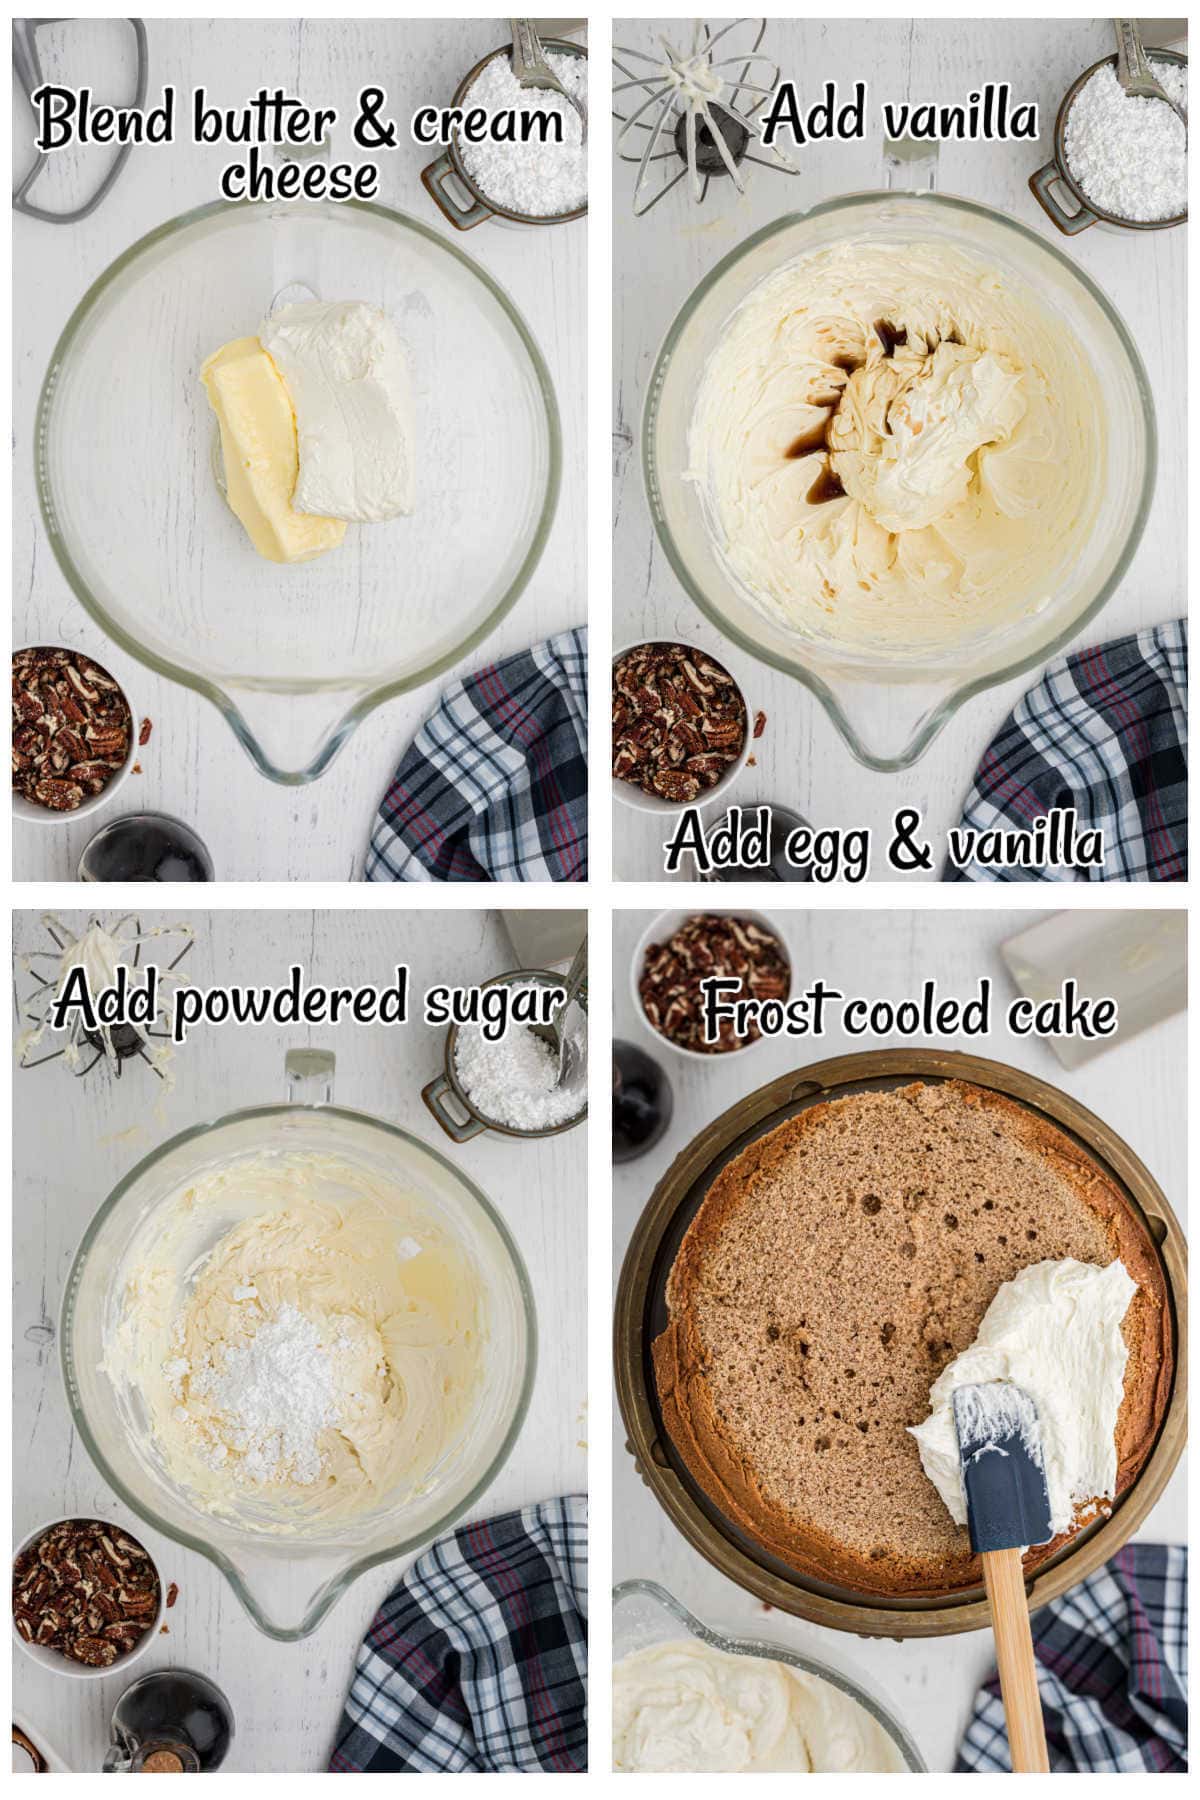 Steps for making the cream cheese frosting.